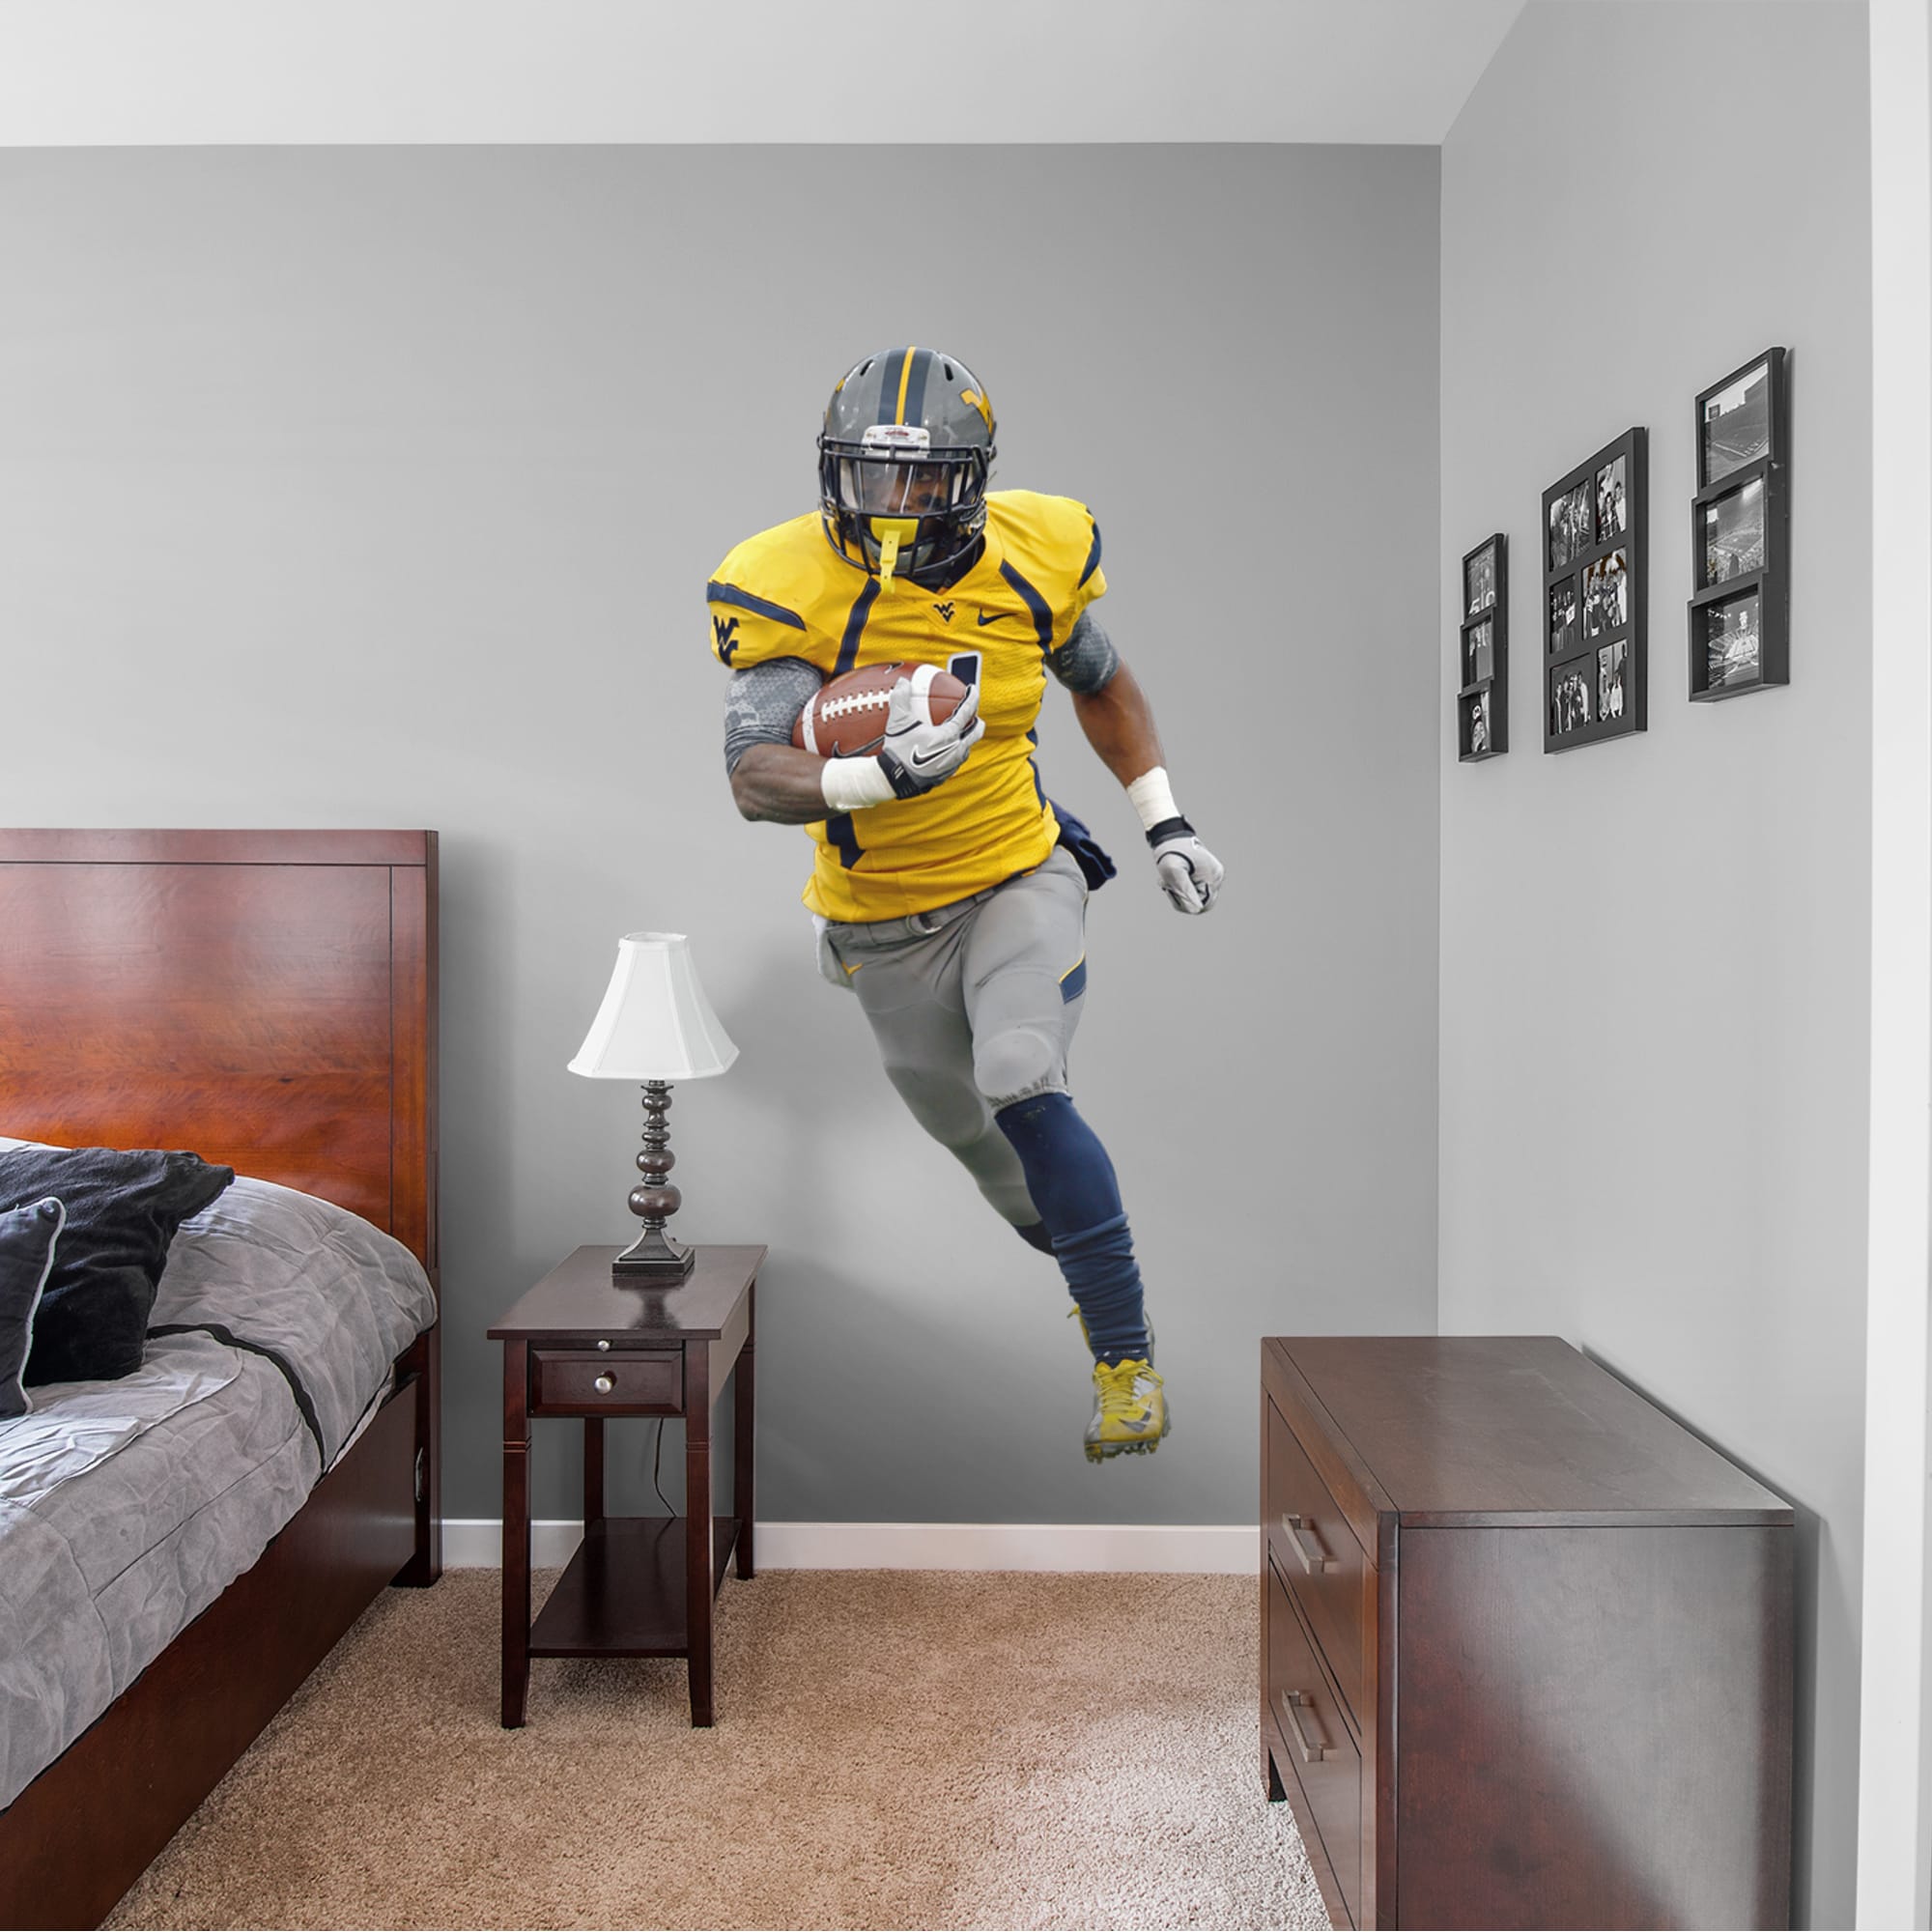 Tavon Austin for West Virginia Mountaineers: West Virginia - Officially Licensed Removable Wall Decal 34.0"W x 73.0"H by Fathead